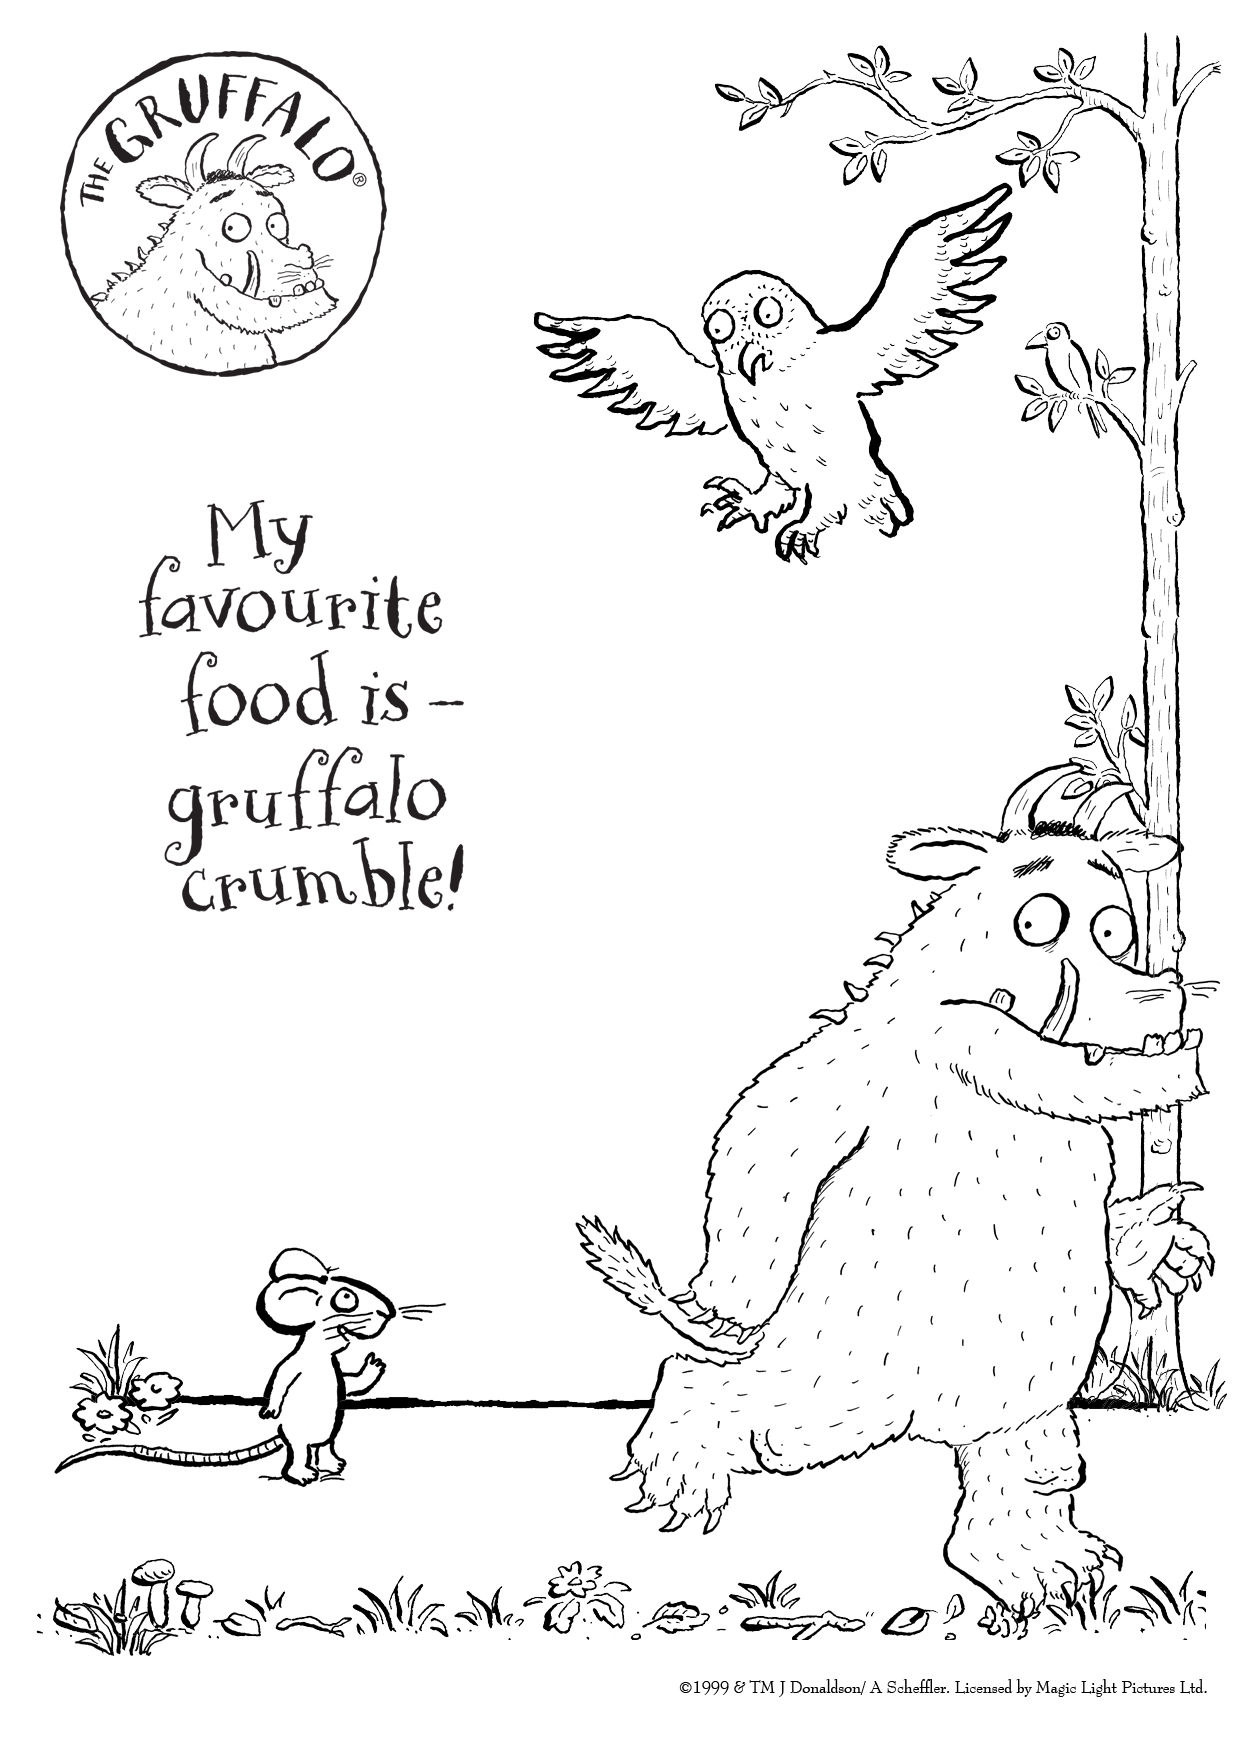 gruffalo-coloring-pages-at-getdrawings-free-download